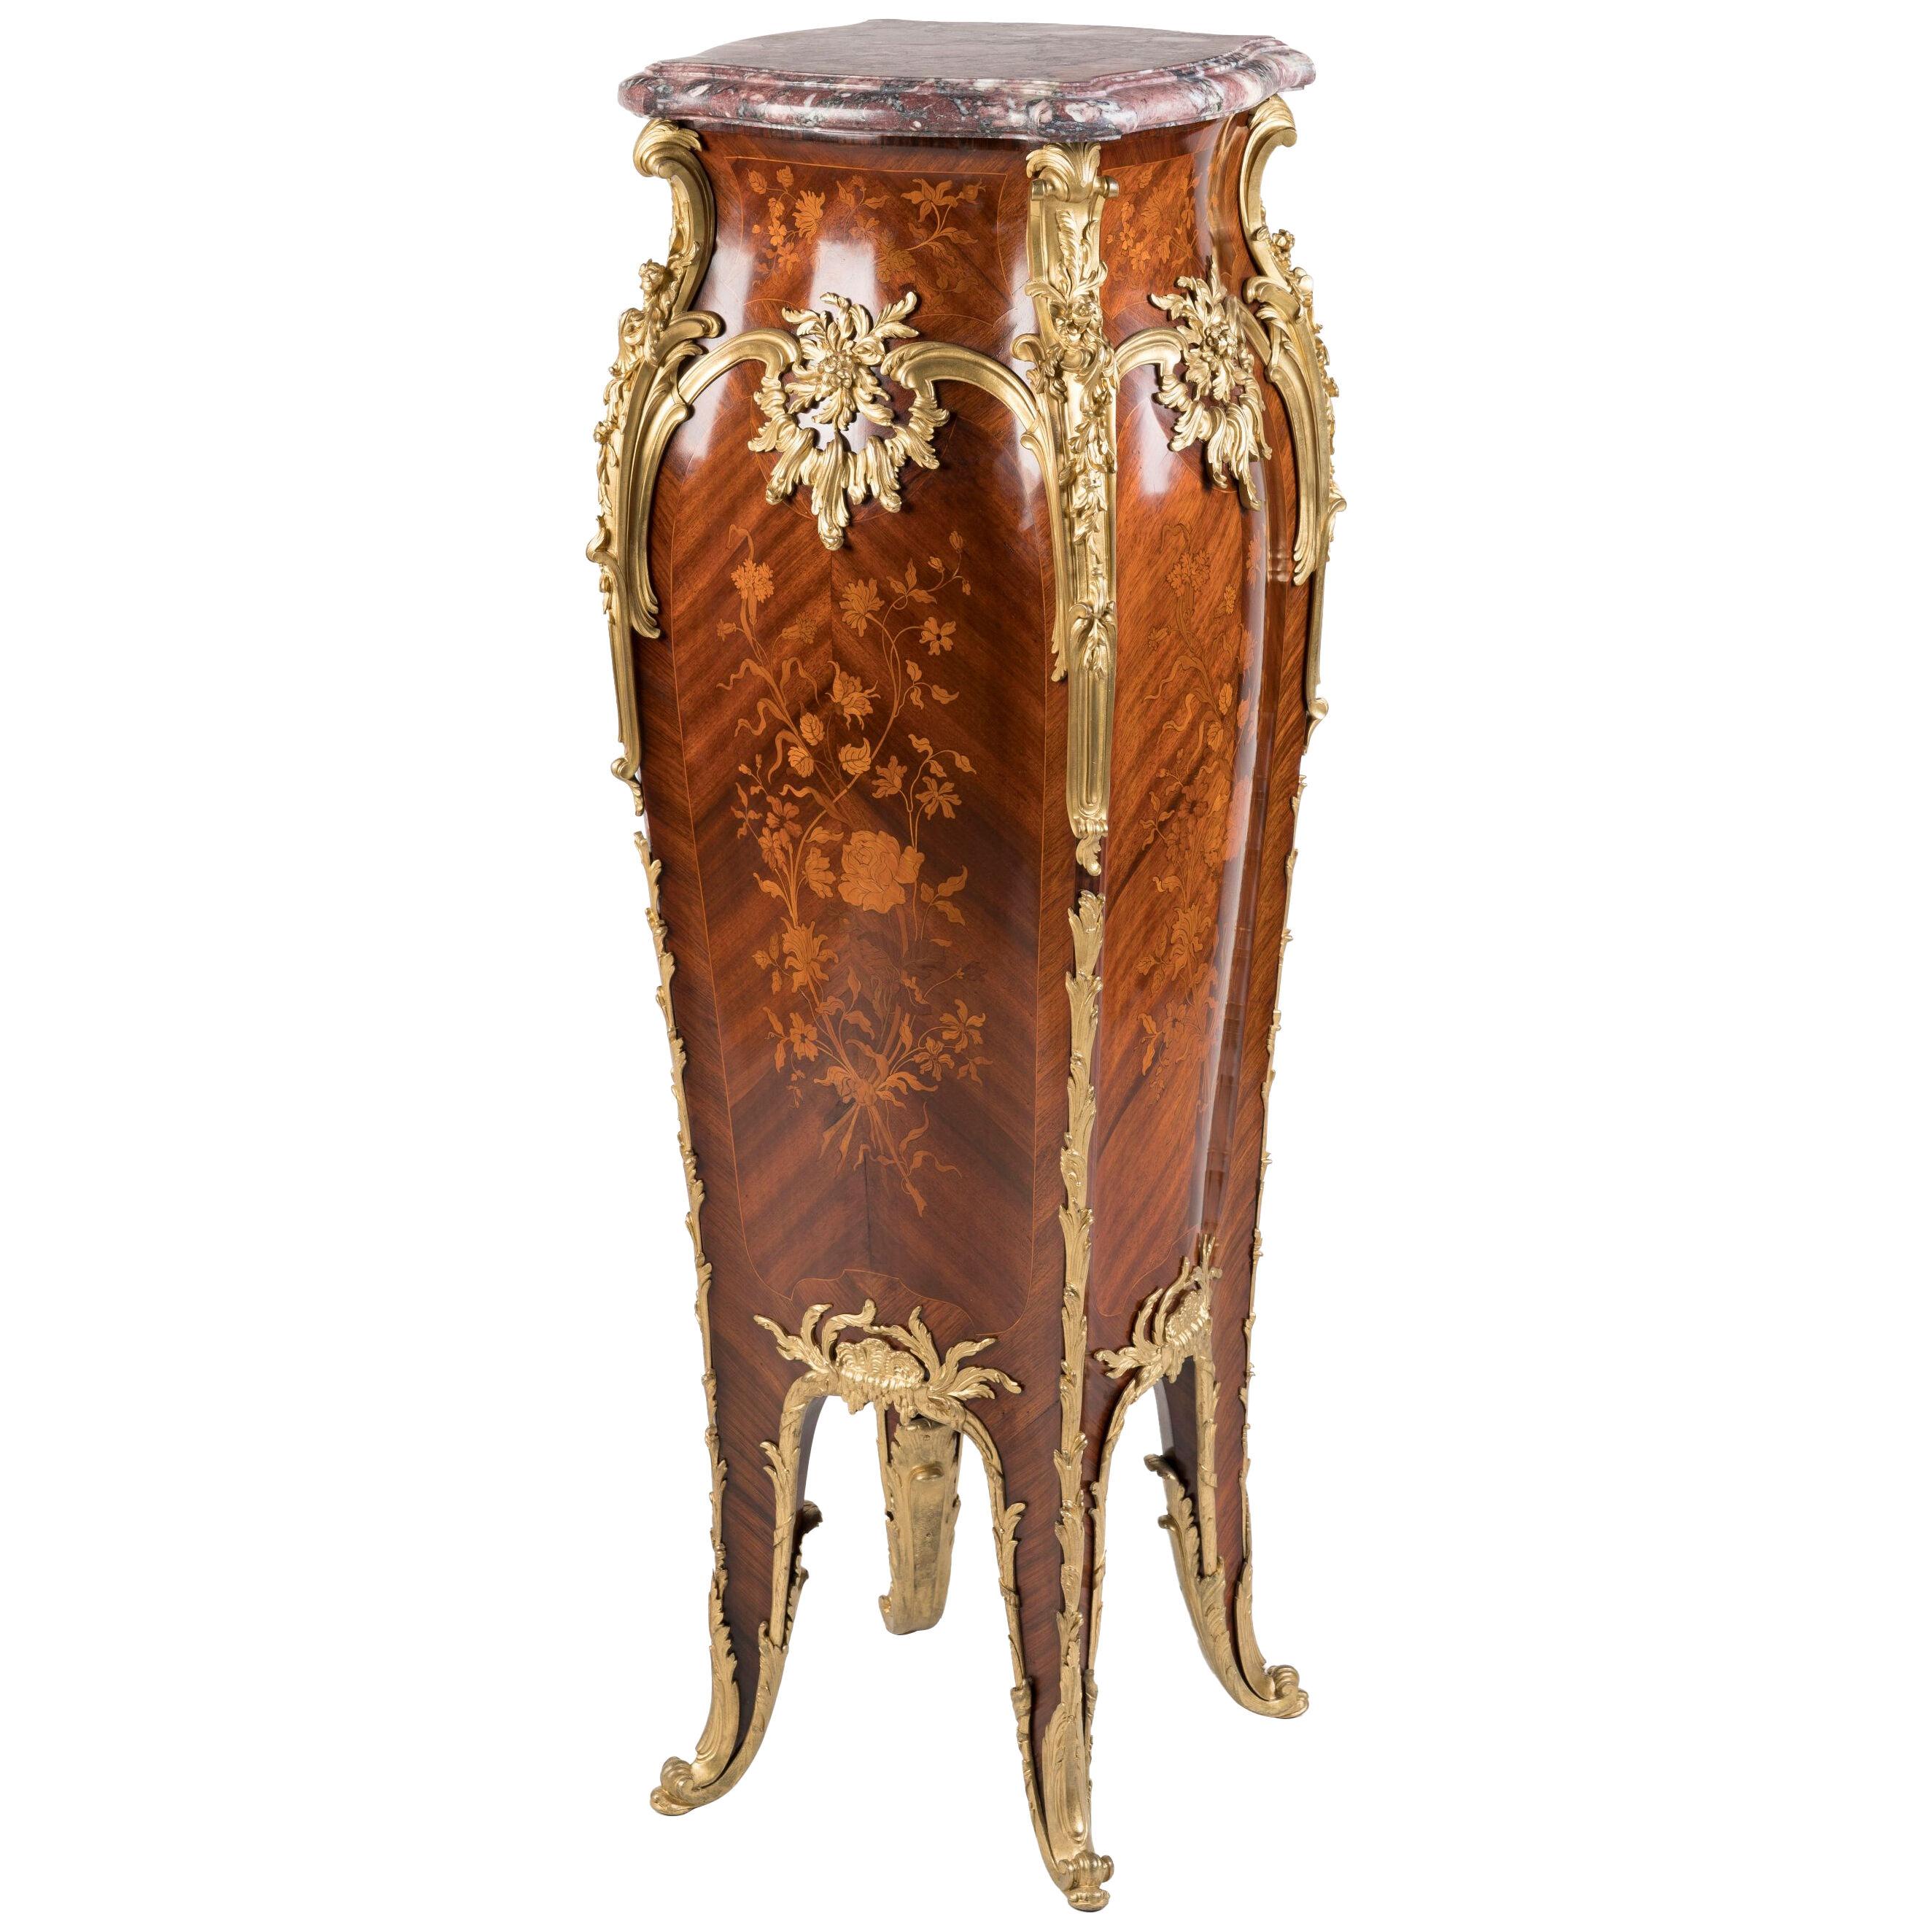 Rare Ormolu-Mounted & Marquetry Pedestal in the Louis XV Style